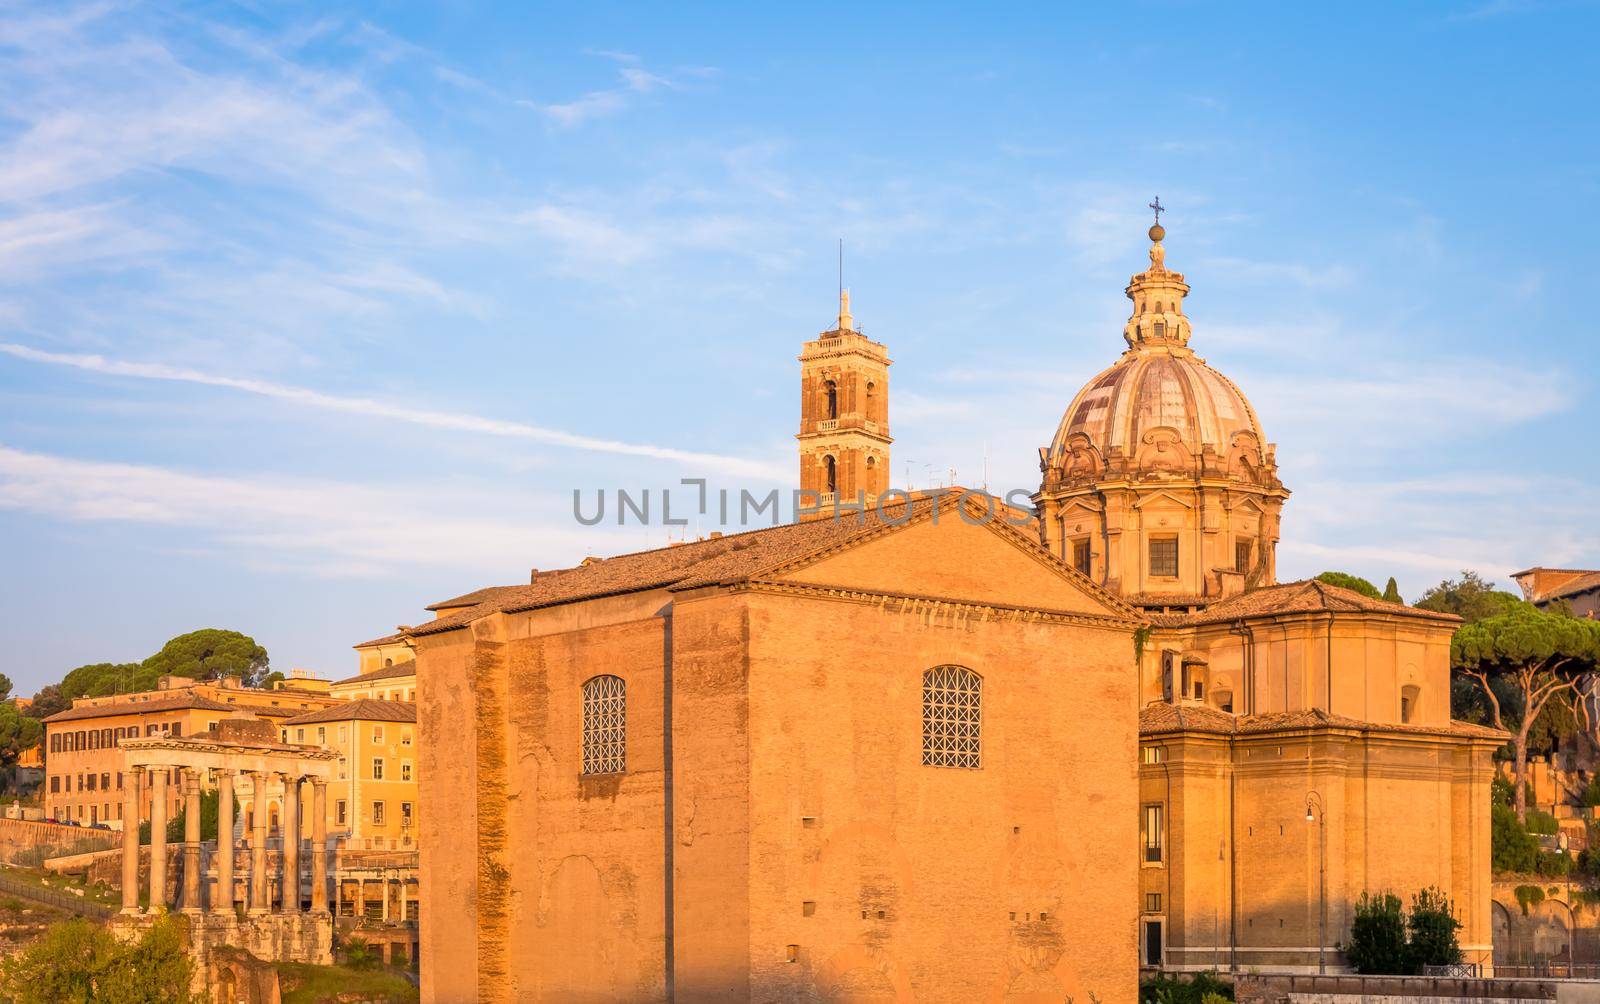 Sunrise light with blue sky on Roman ancient architecture in Rome, Italy by Perseomedusa